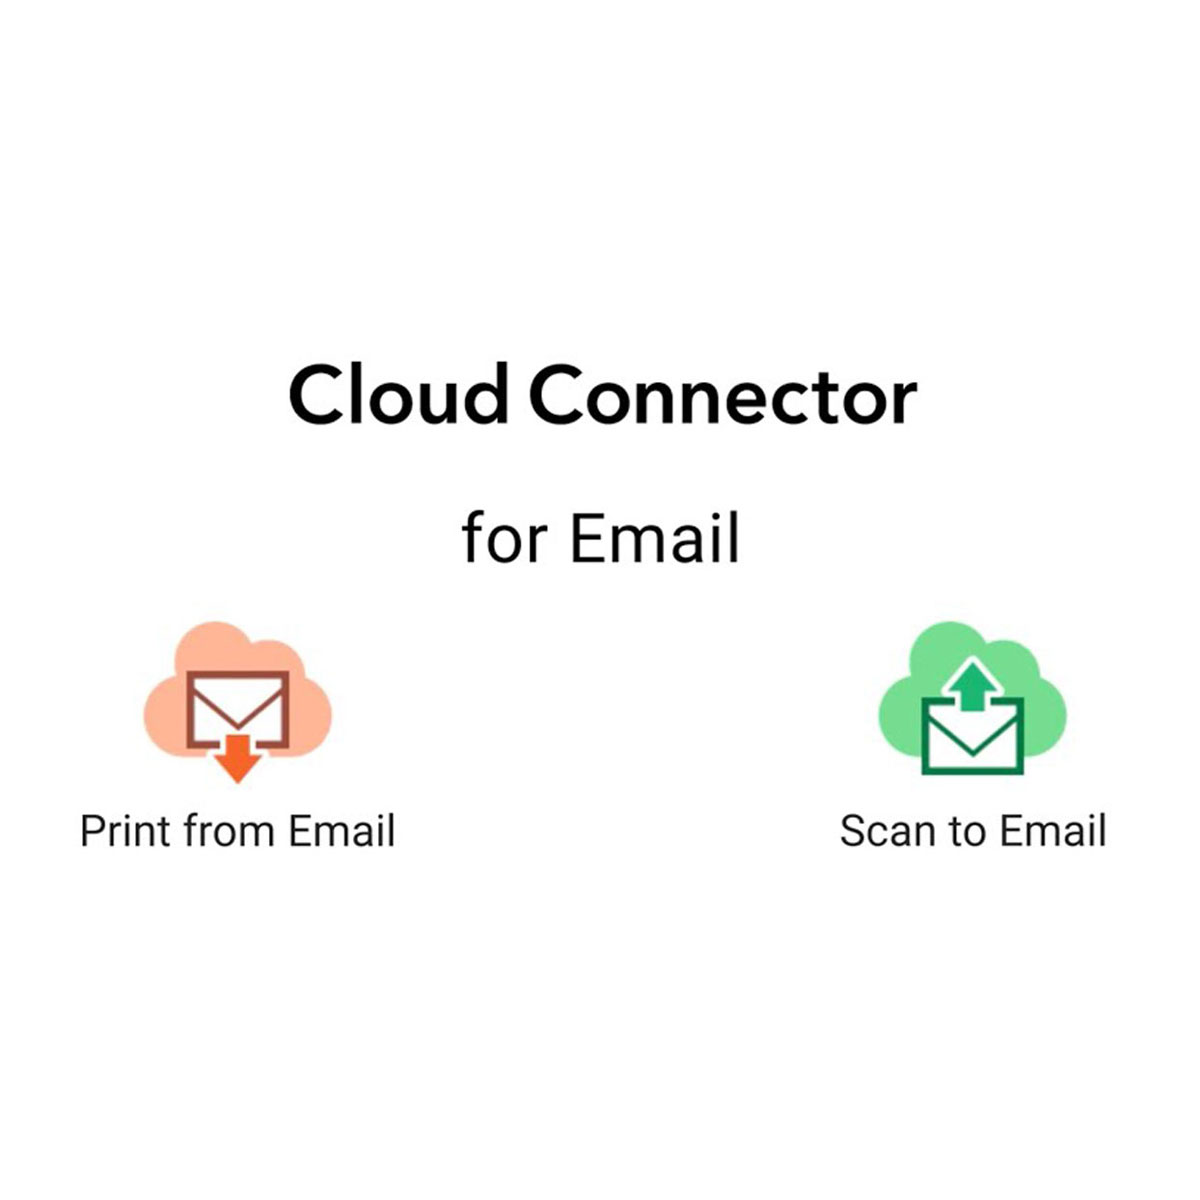 Cloud Connector for Email